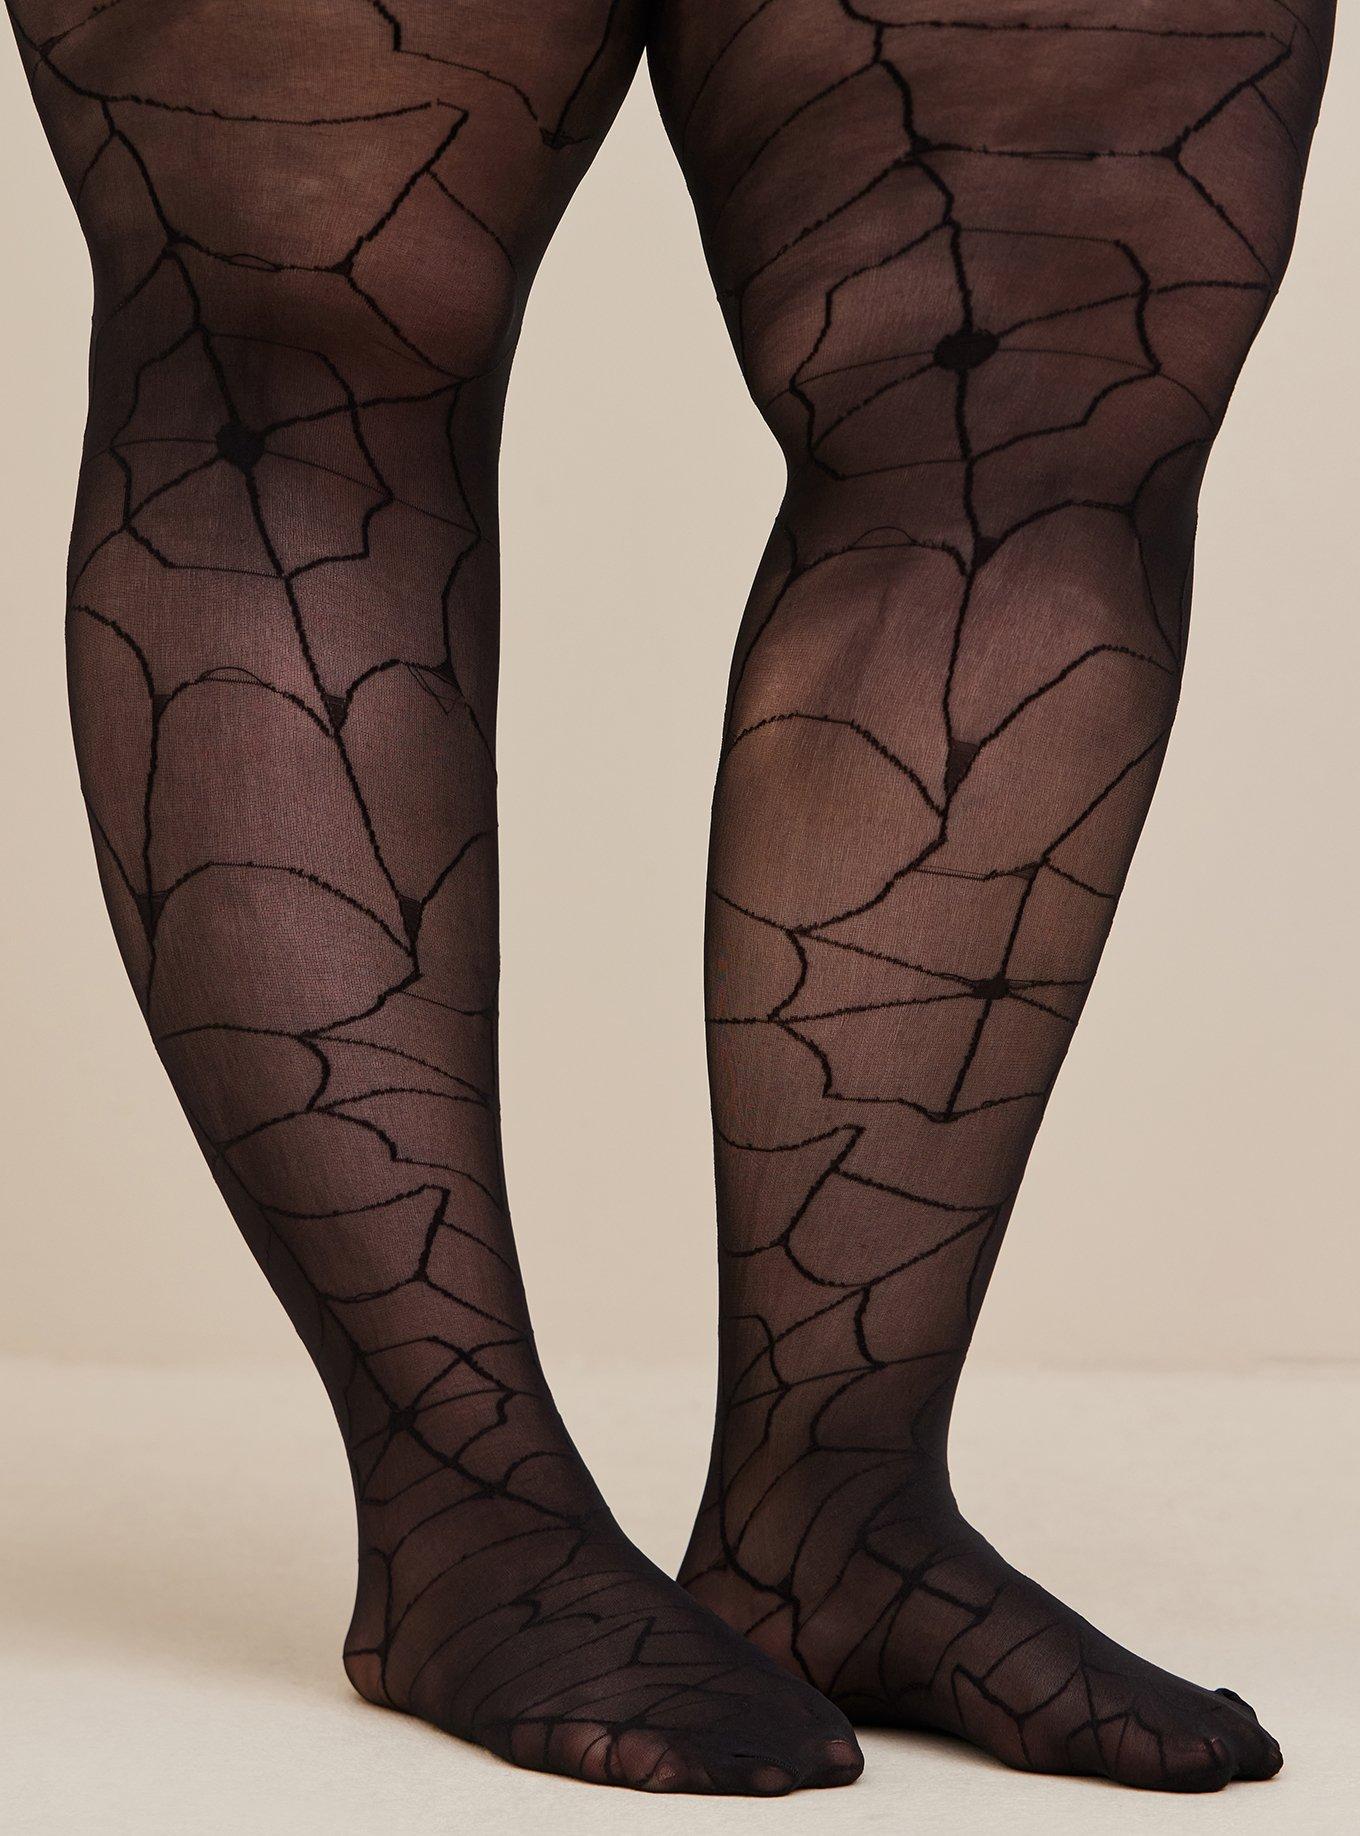 Get your Spider Tights for Halloween ASAP - UK Tights Blog